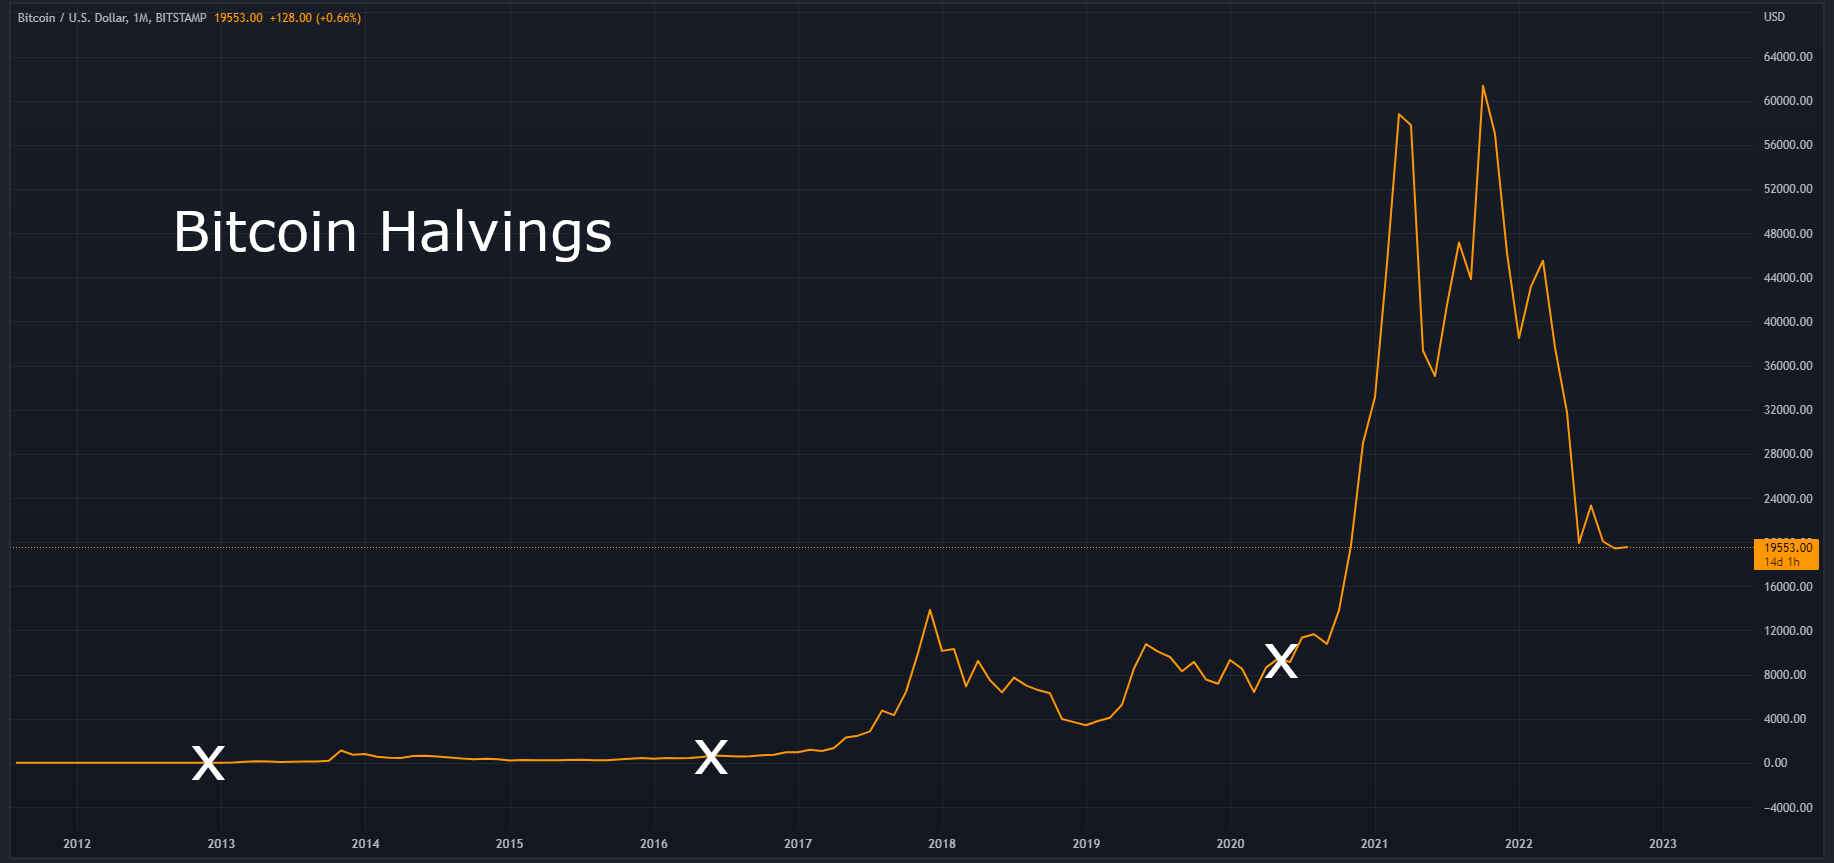 Bitcoin price chart with markings indicating halving dates.